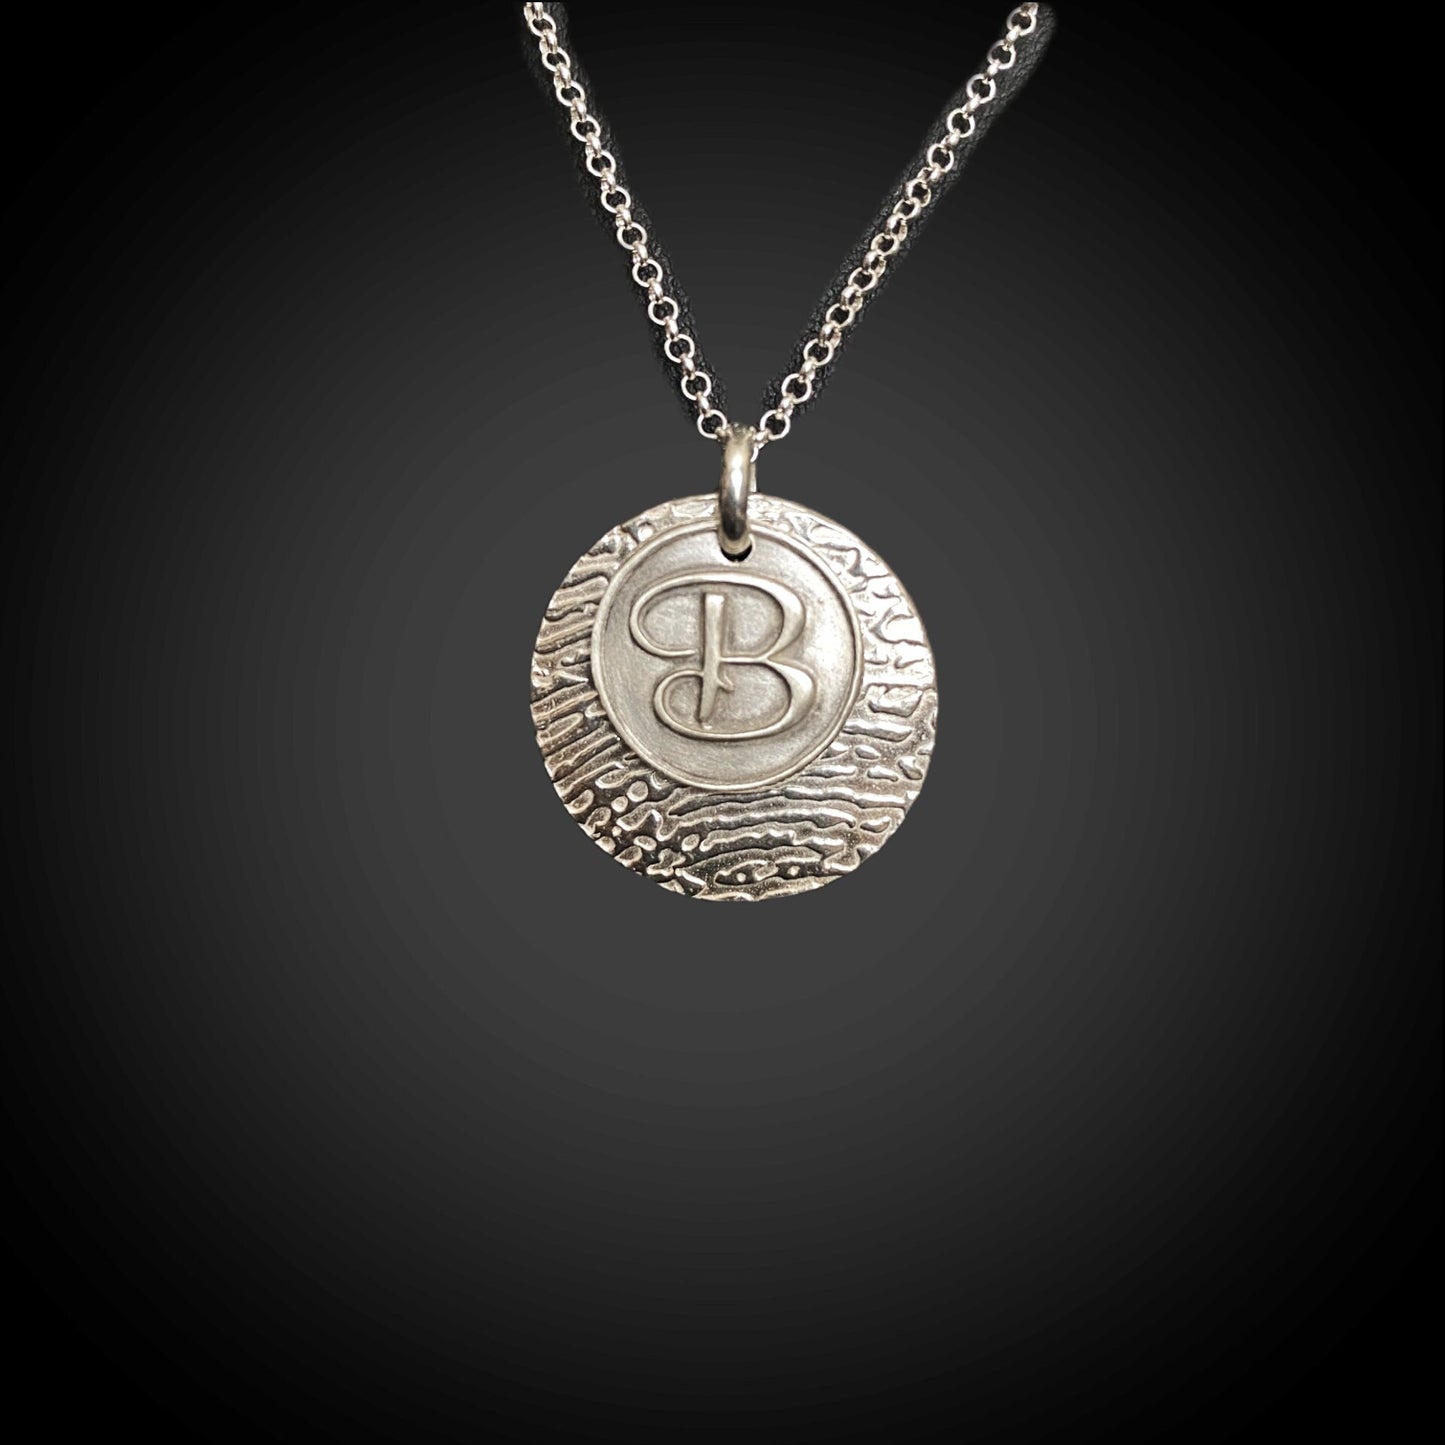 Fingerprint Necklace with Initial Charm